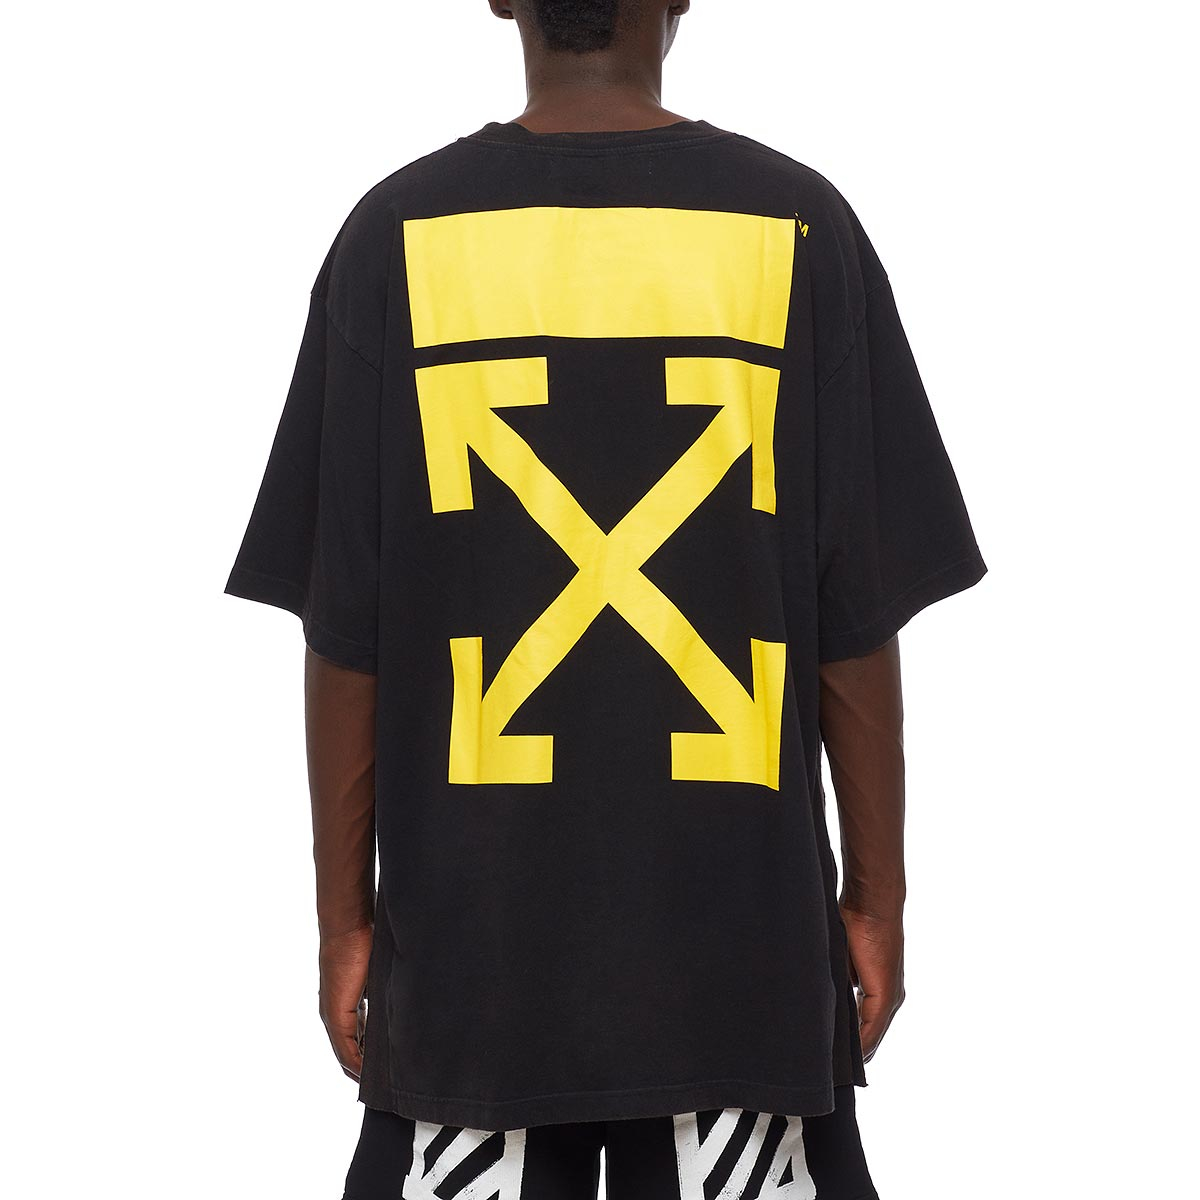 Lyst - Off-White C/O Virgil Abloh Arrows Cotton T-Shirt in Yellow for Men